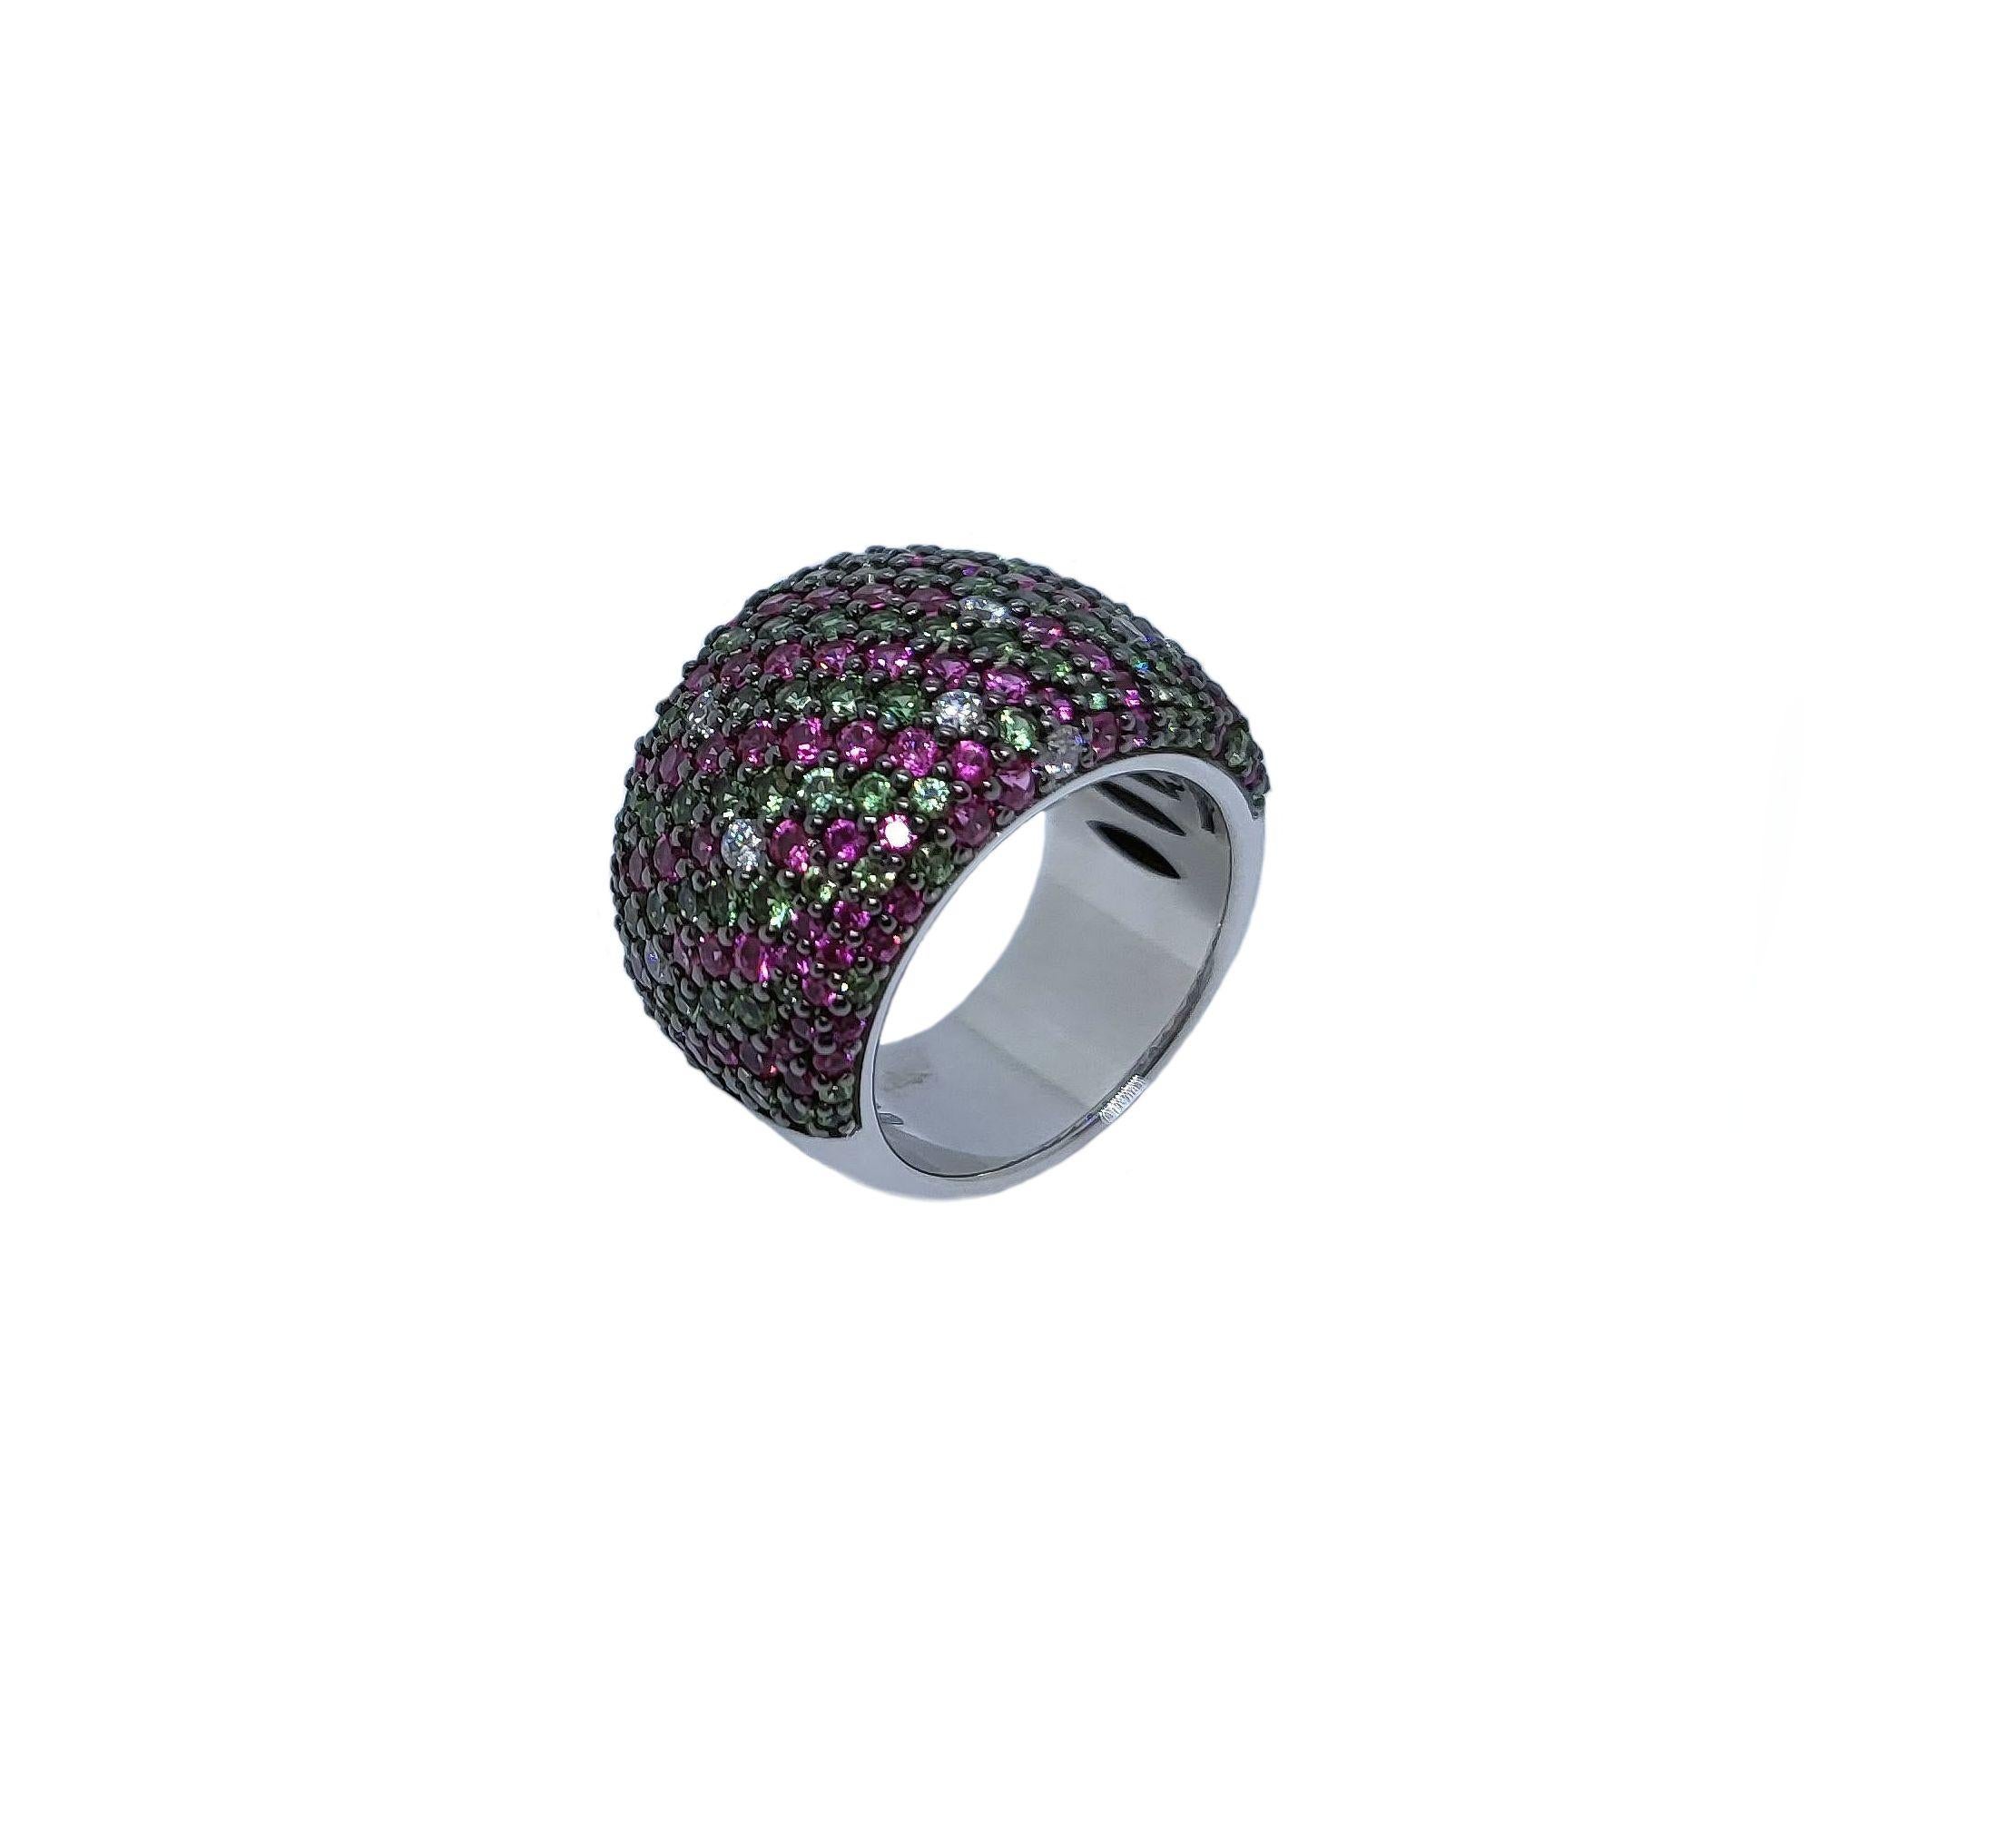 Elegant Paveé Ring made of White Gold, 2.68 carat pink sapphires and 2.68 carat green tourmalines, designed by Wagner Preziosen. 
The rich colors of this classy ring sparkle and shine in daylight as well as in candlelight - wear it with your office